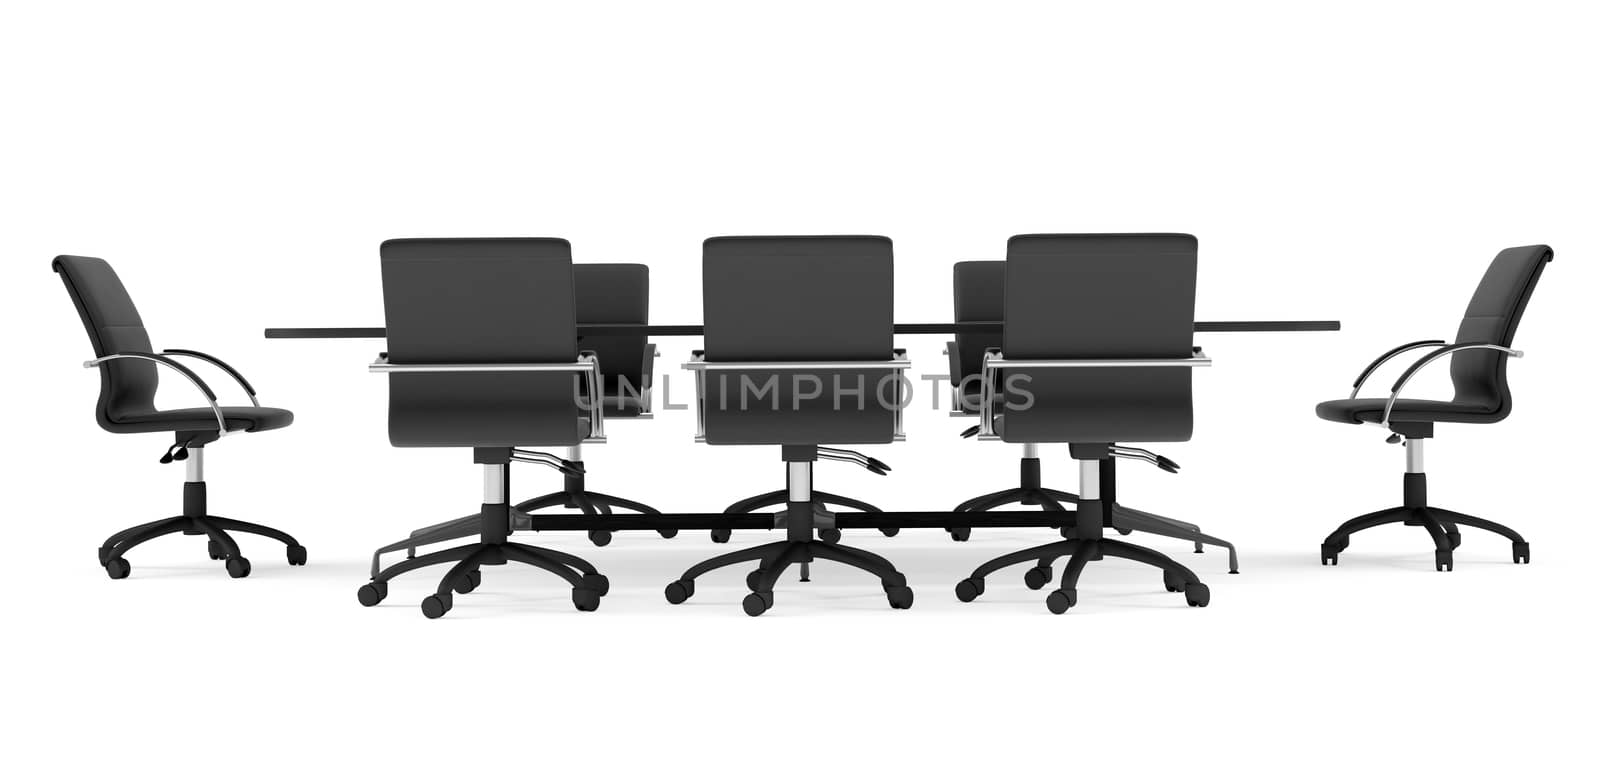 Business conference table with chairs. Isolated render on white background